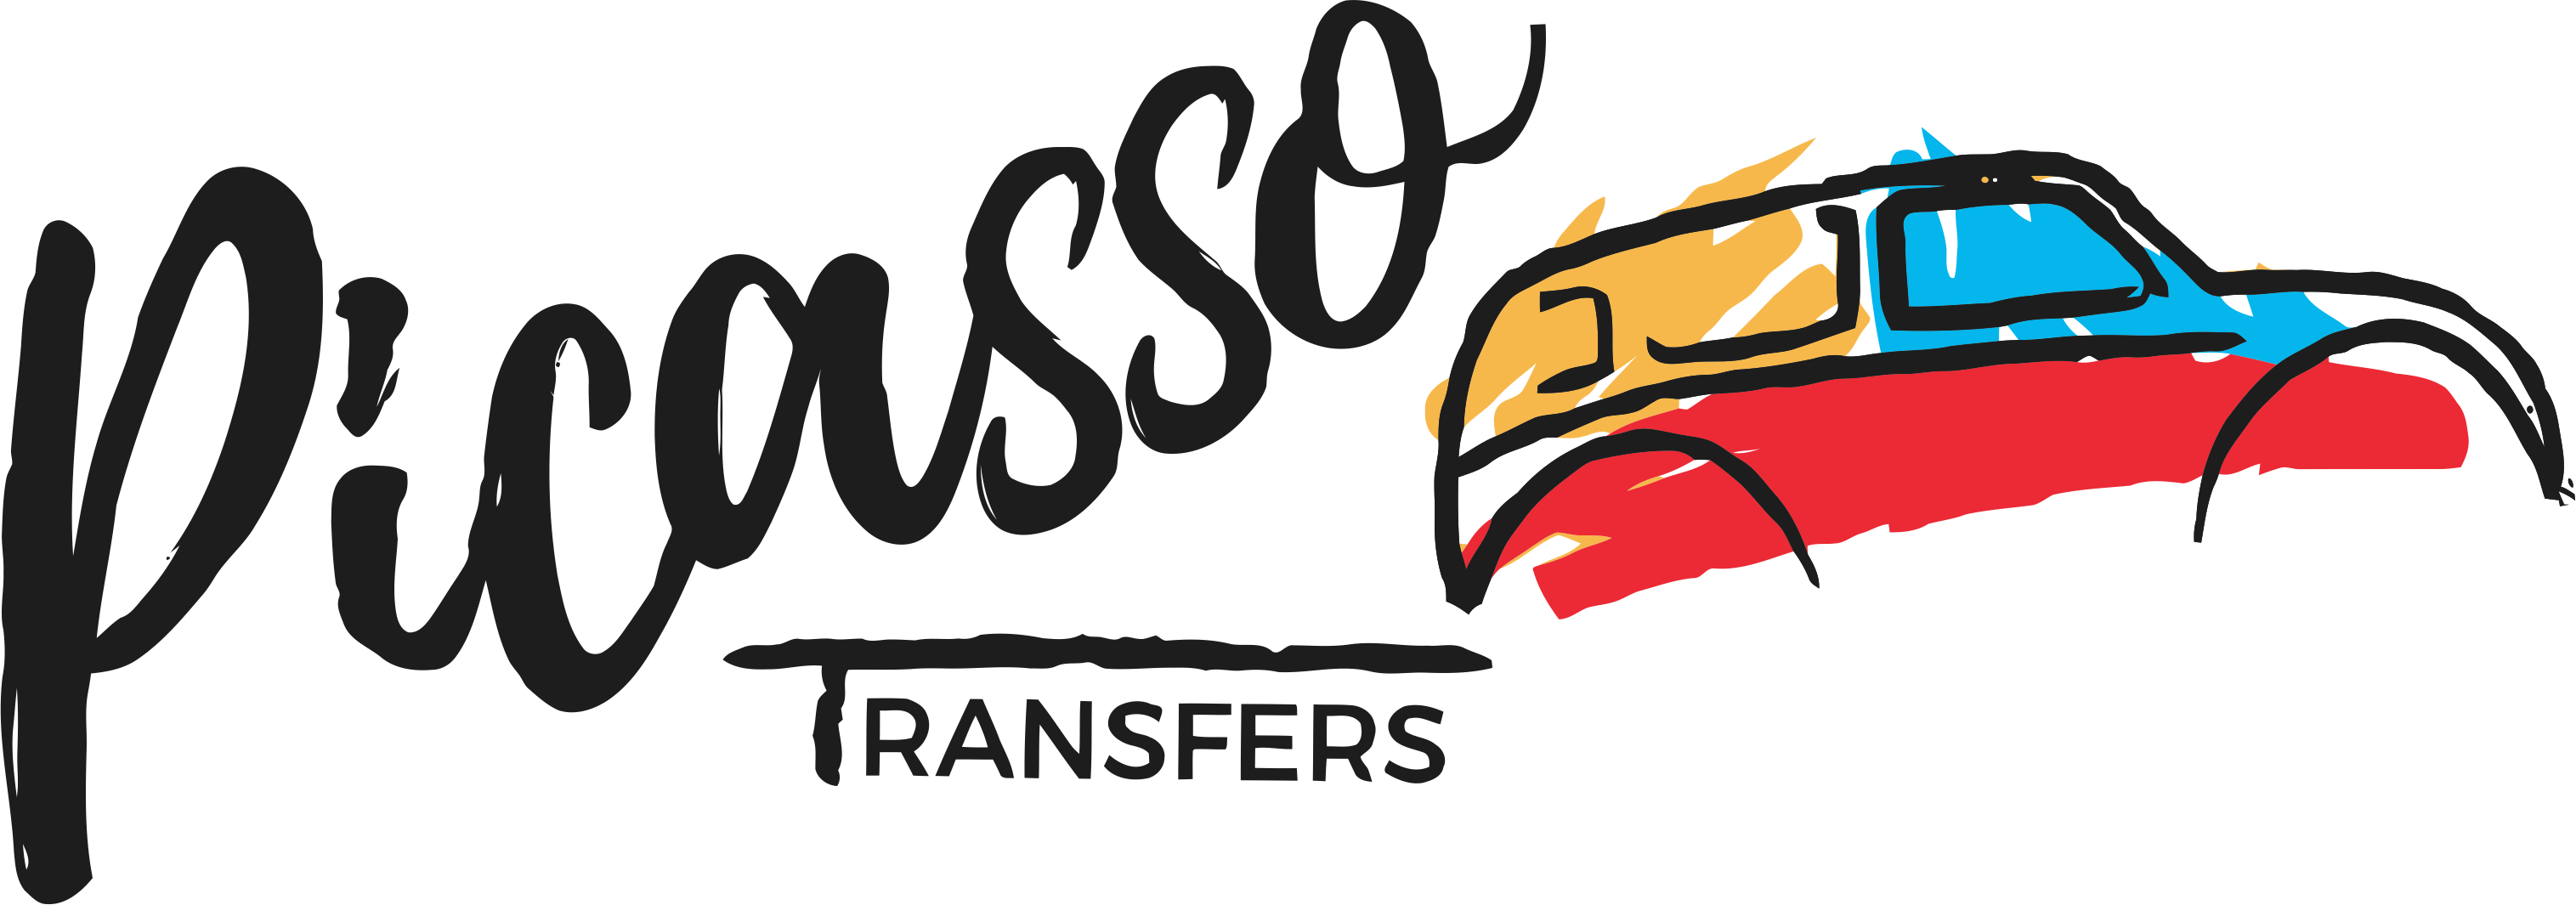 Picasso Transfers Malaga | Your Holiday Starts With Us!